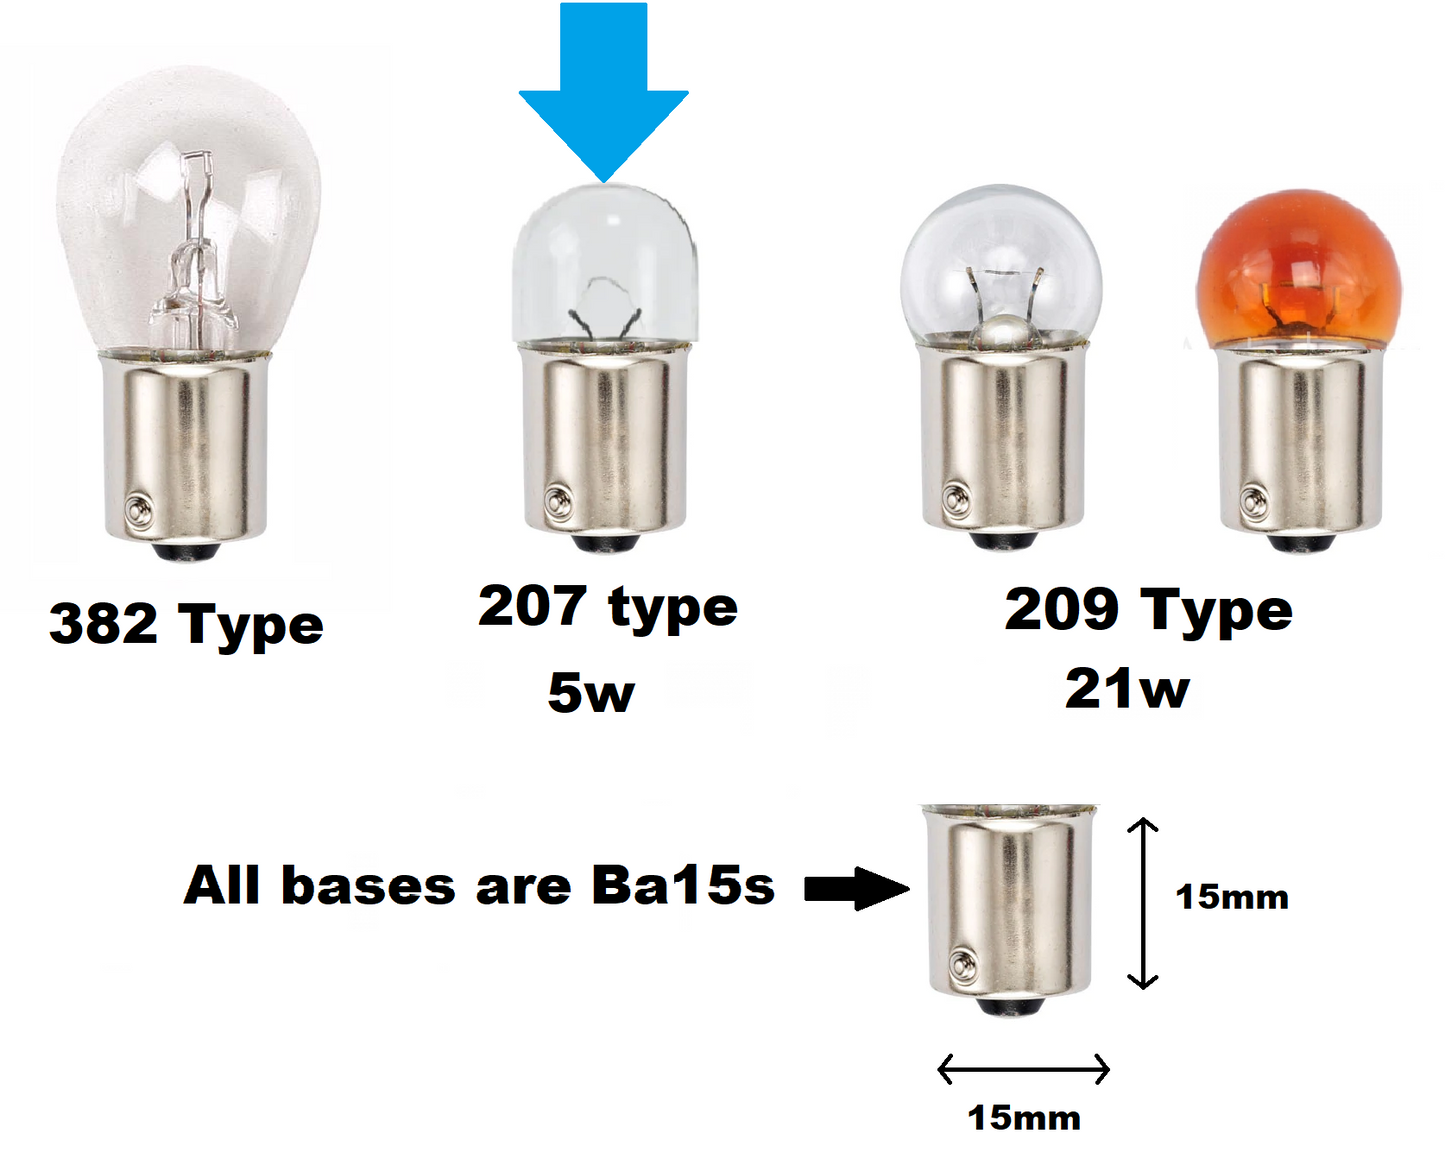 Clear BA15s Side/Indicator bulbs for Land Rover Defender (x2)